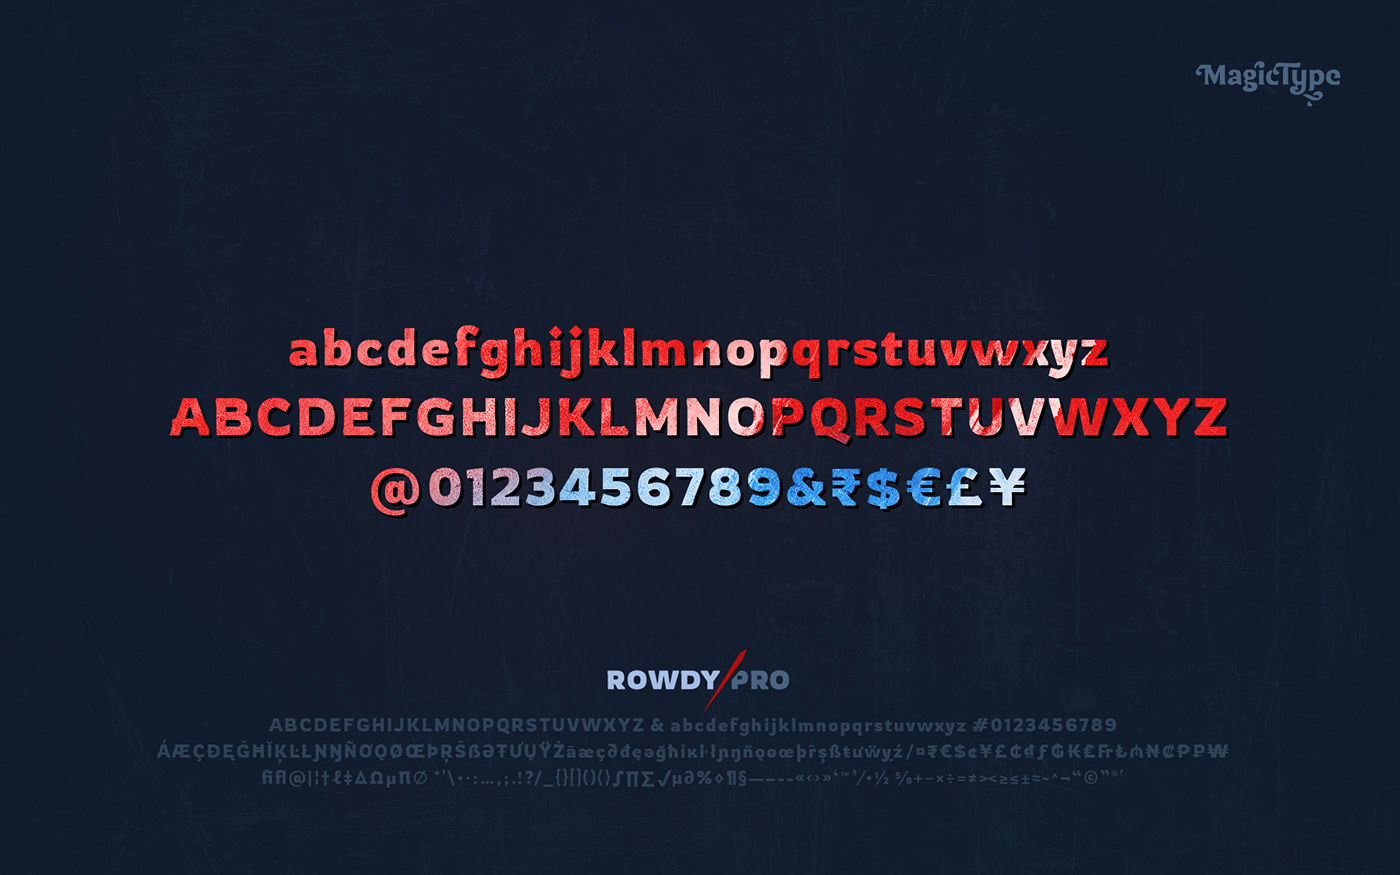 rowdy Typeface Display font Latin India rough grunge Bollywood action